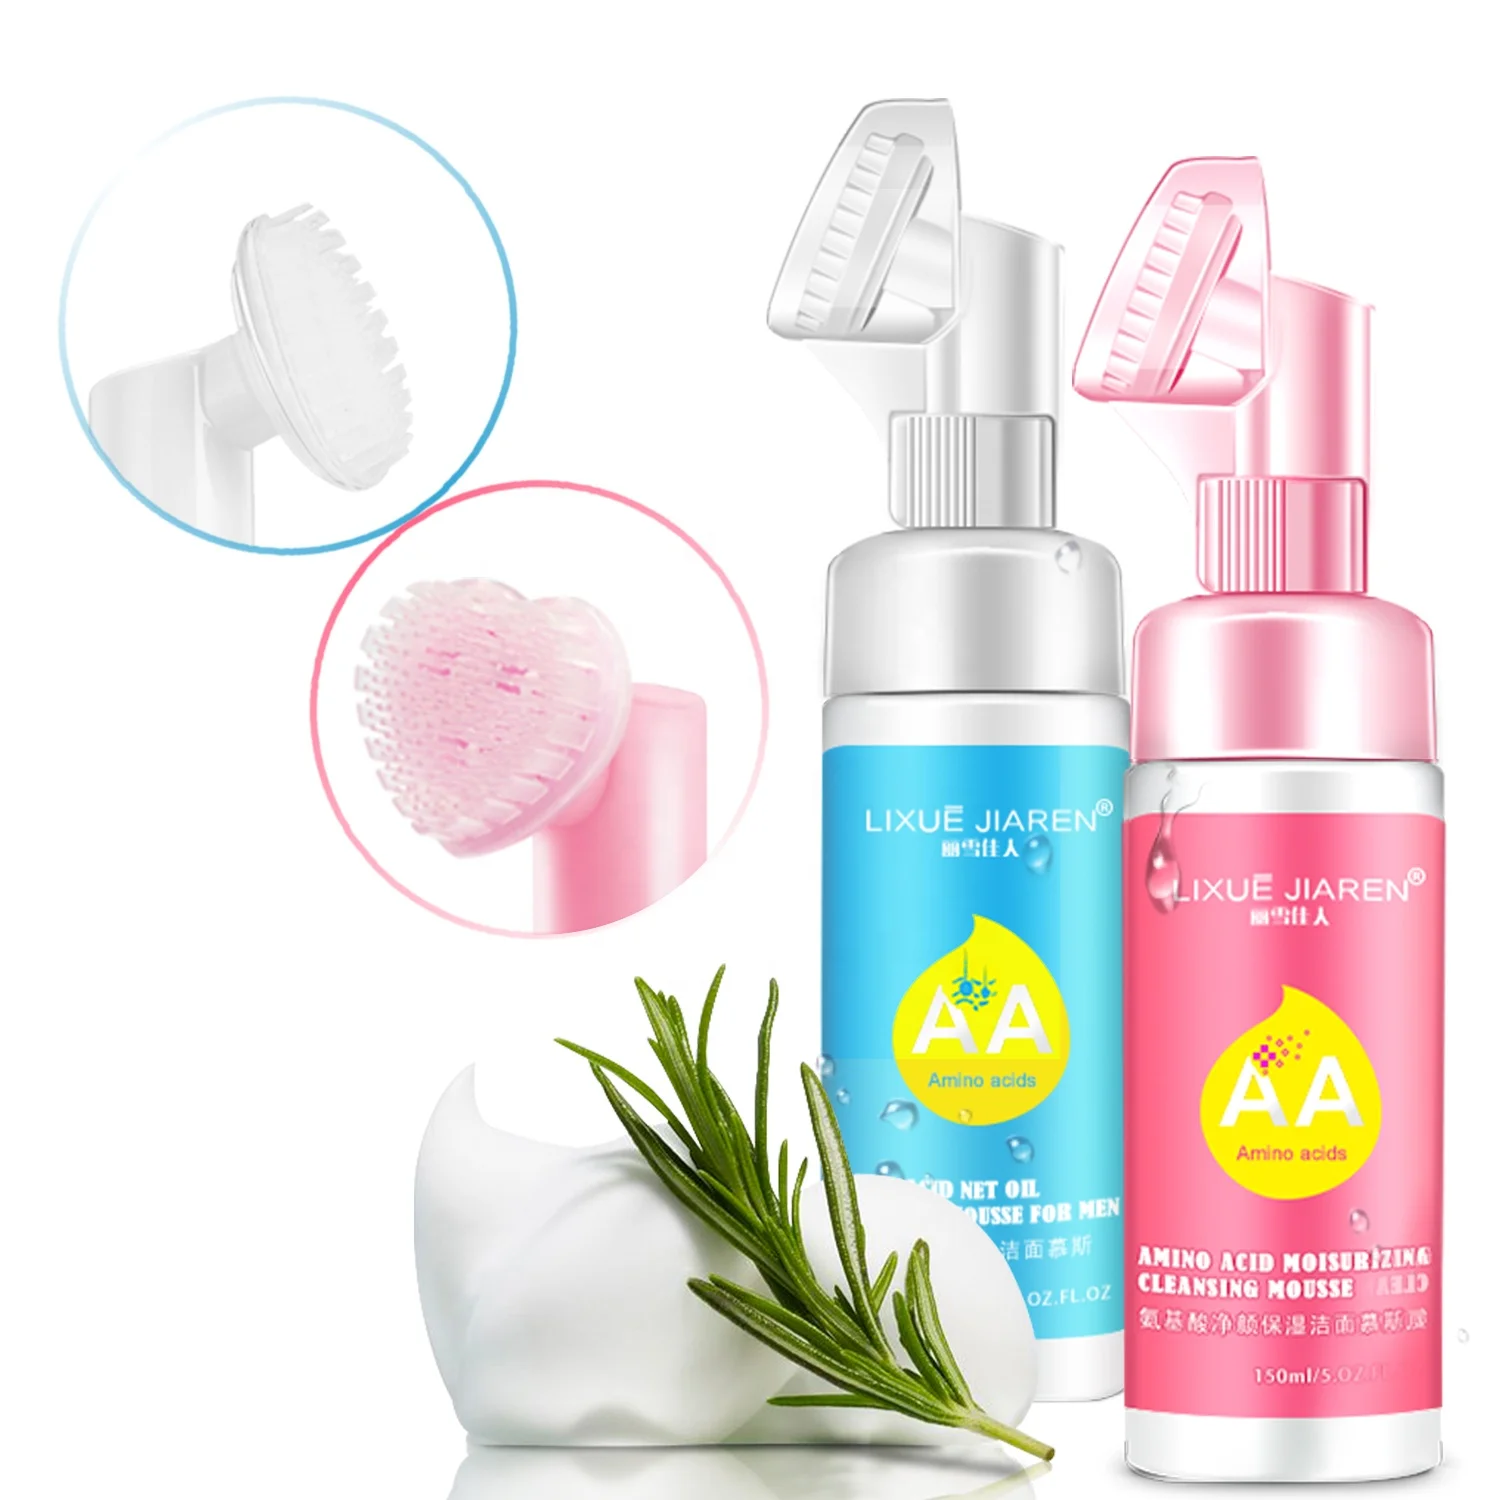 

Amino Acid Activated Brightening Whitening Organic Facial Cleanser Cleansing Mousse, Pink, blue